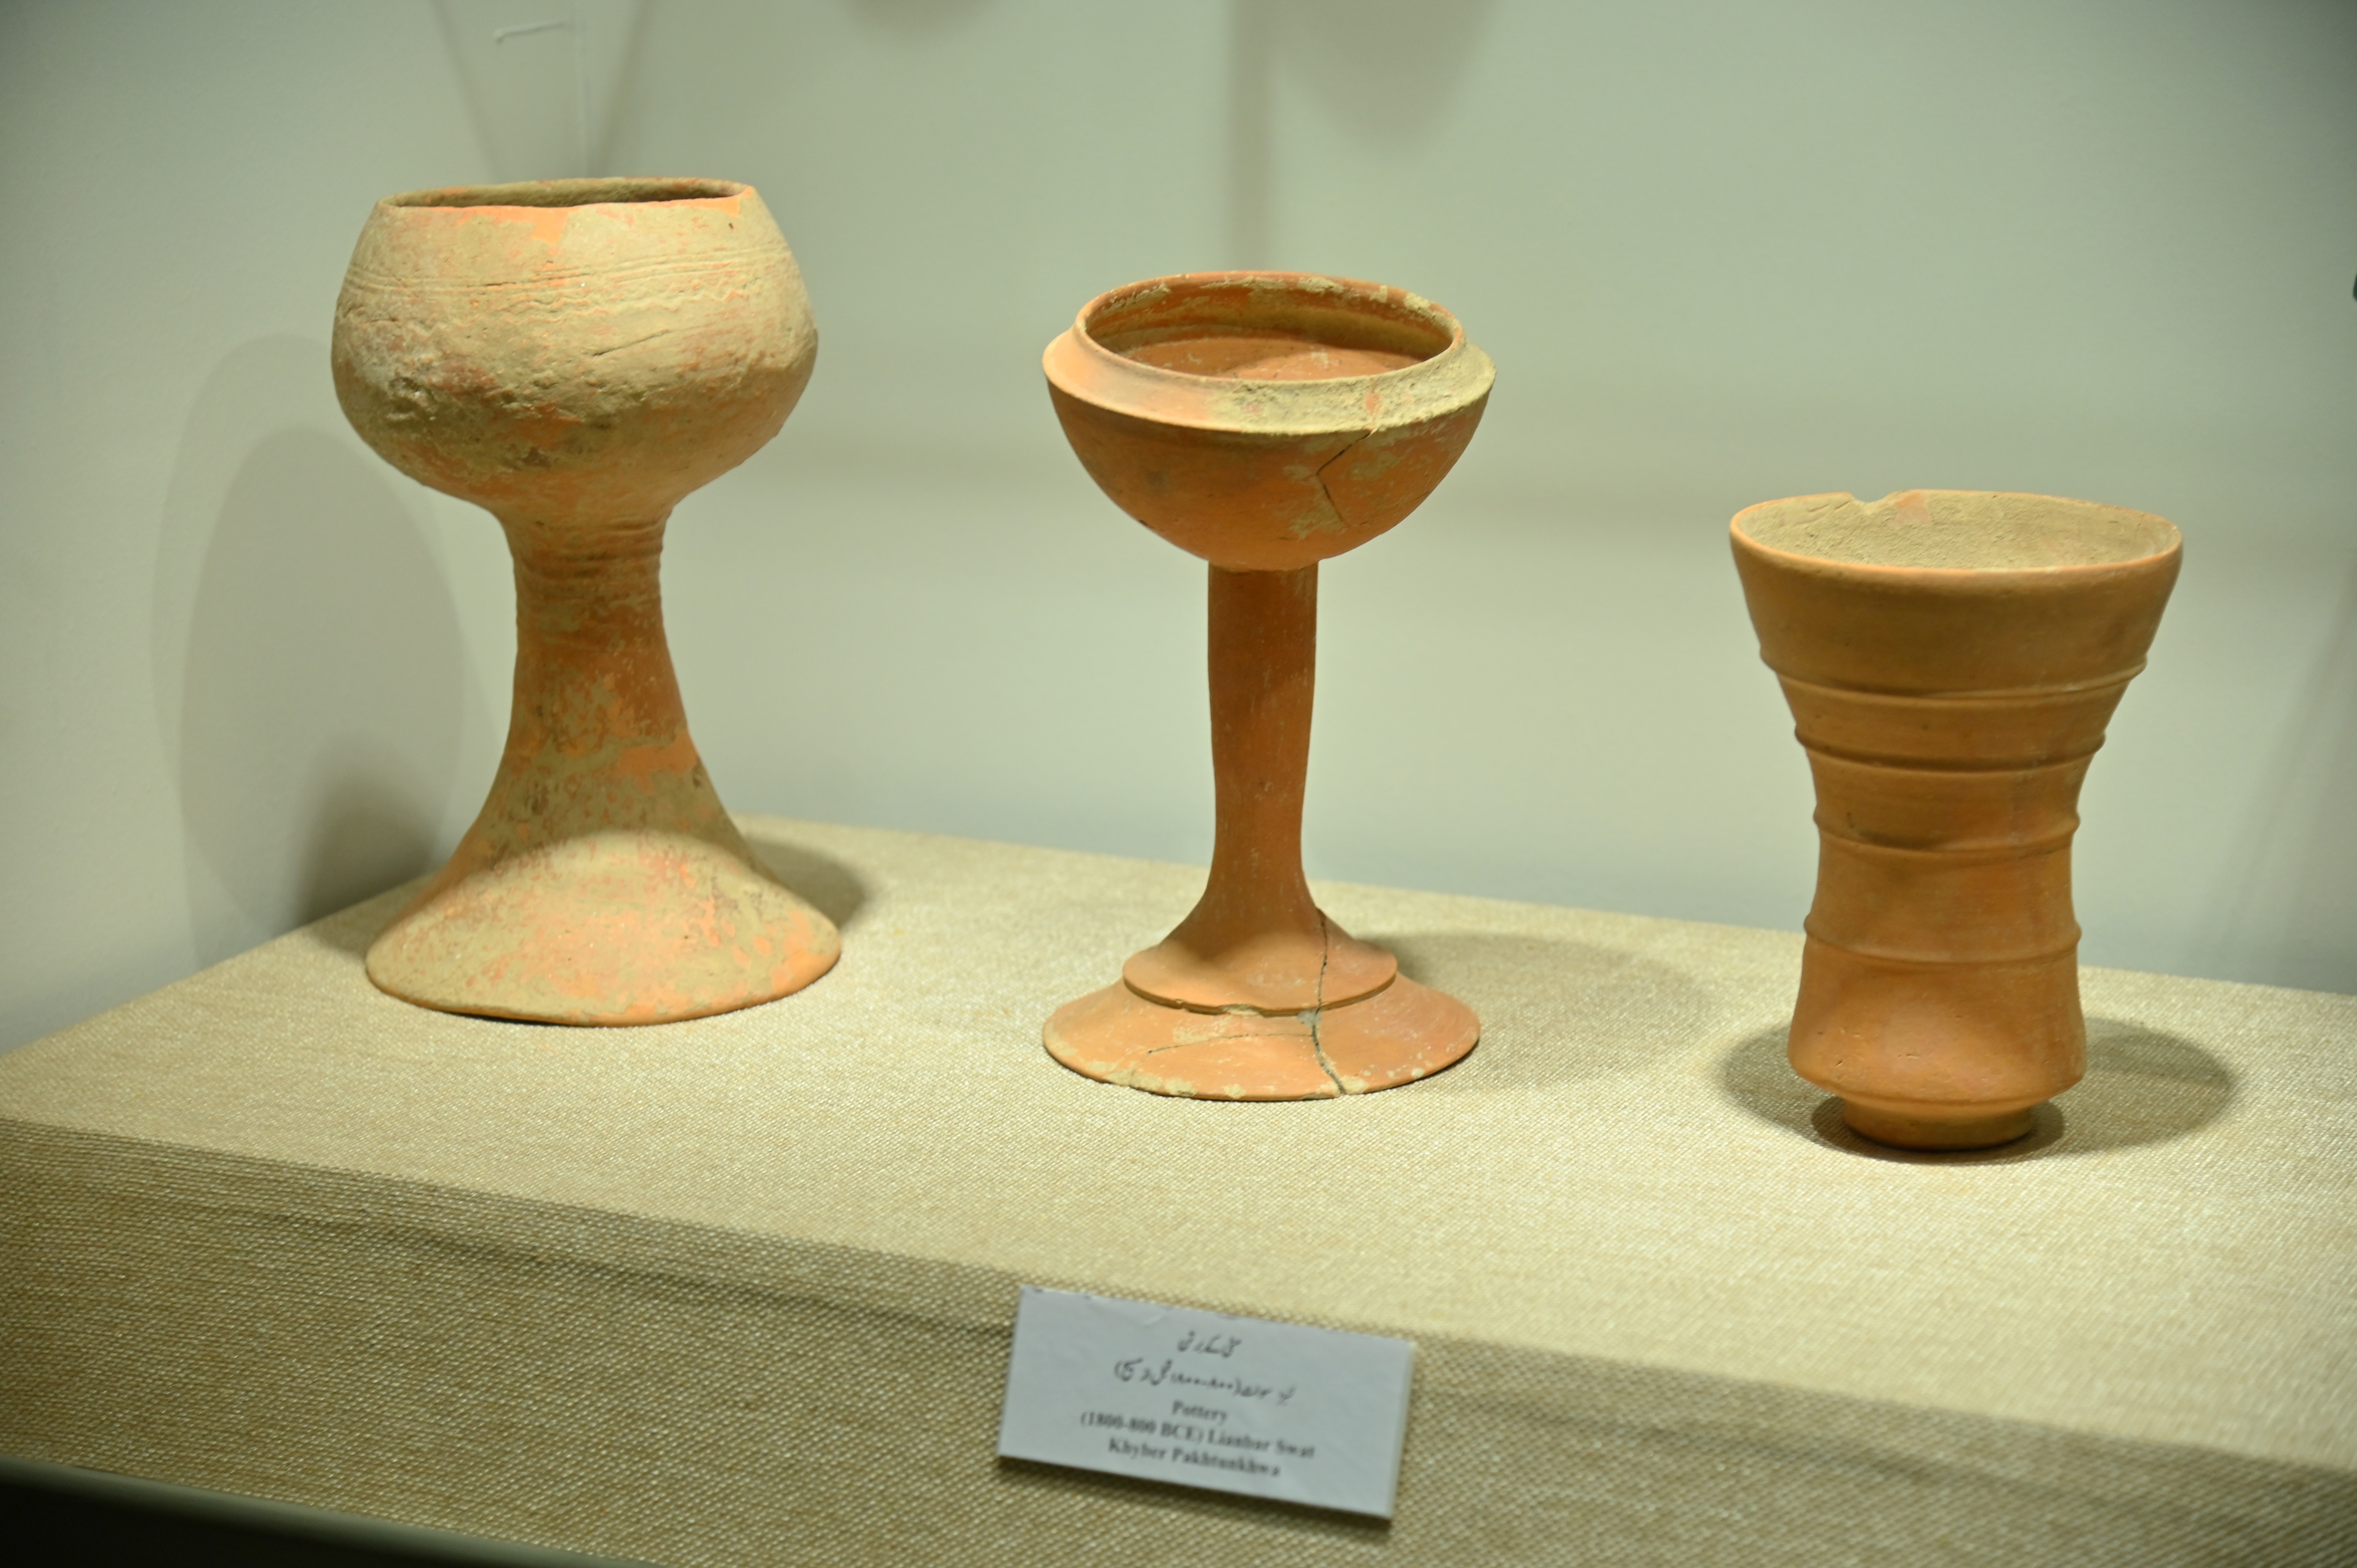 The Collection of pottery made of mud